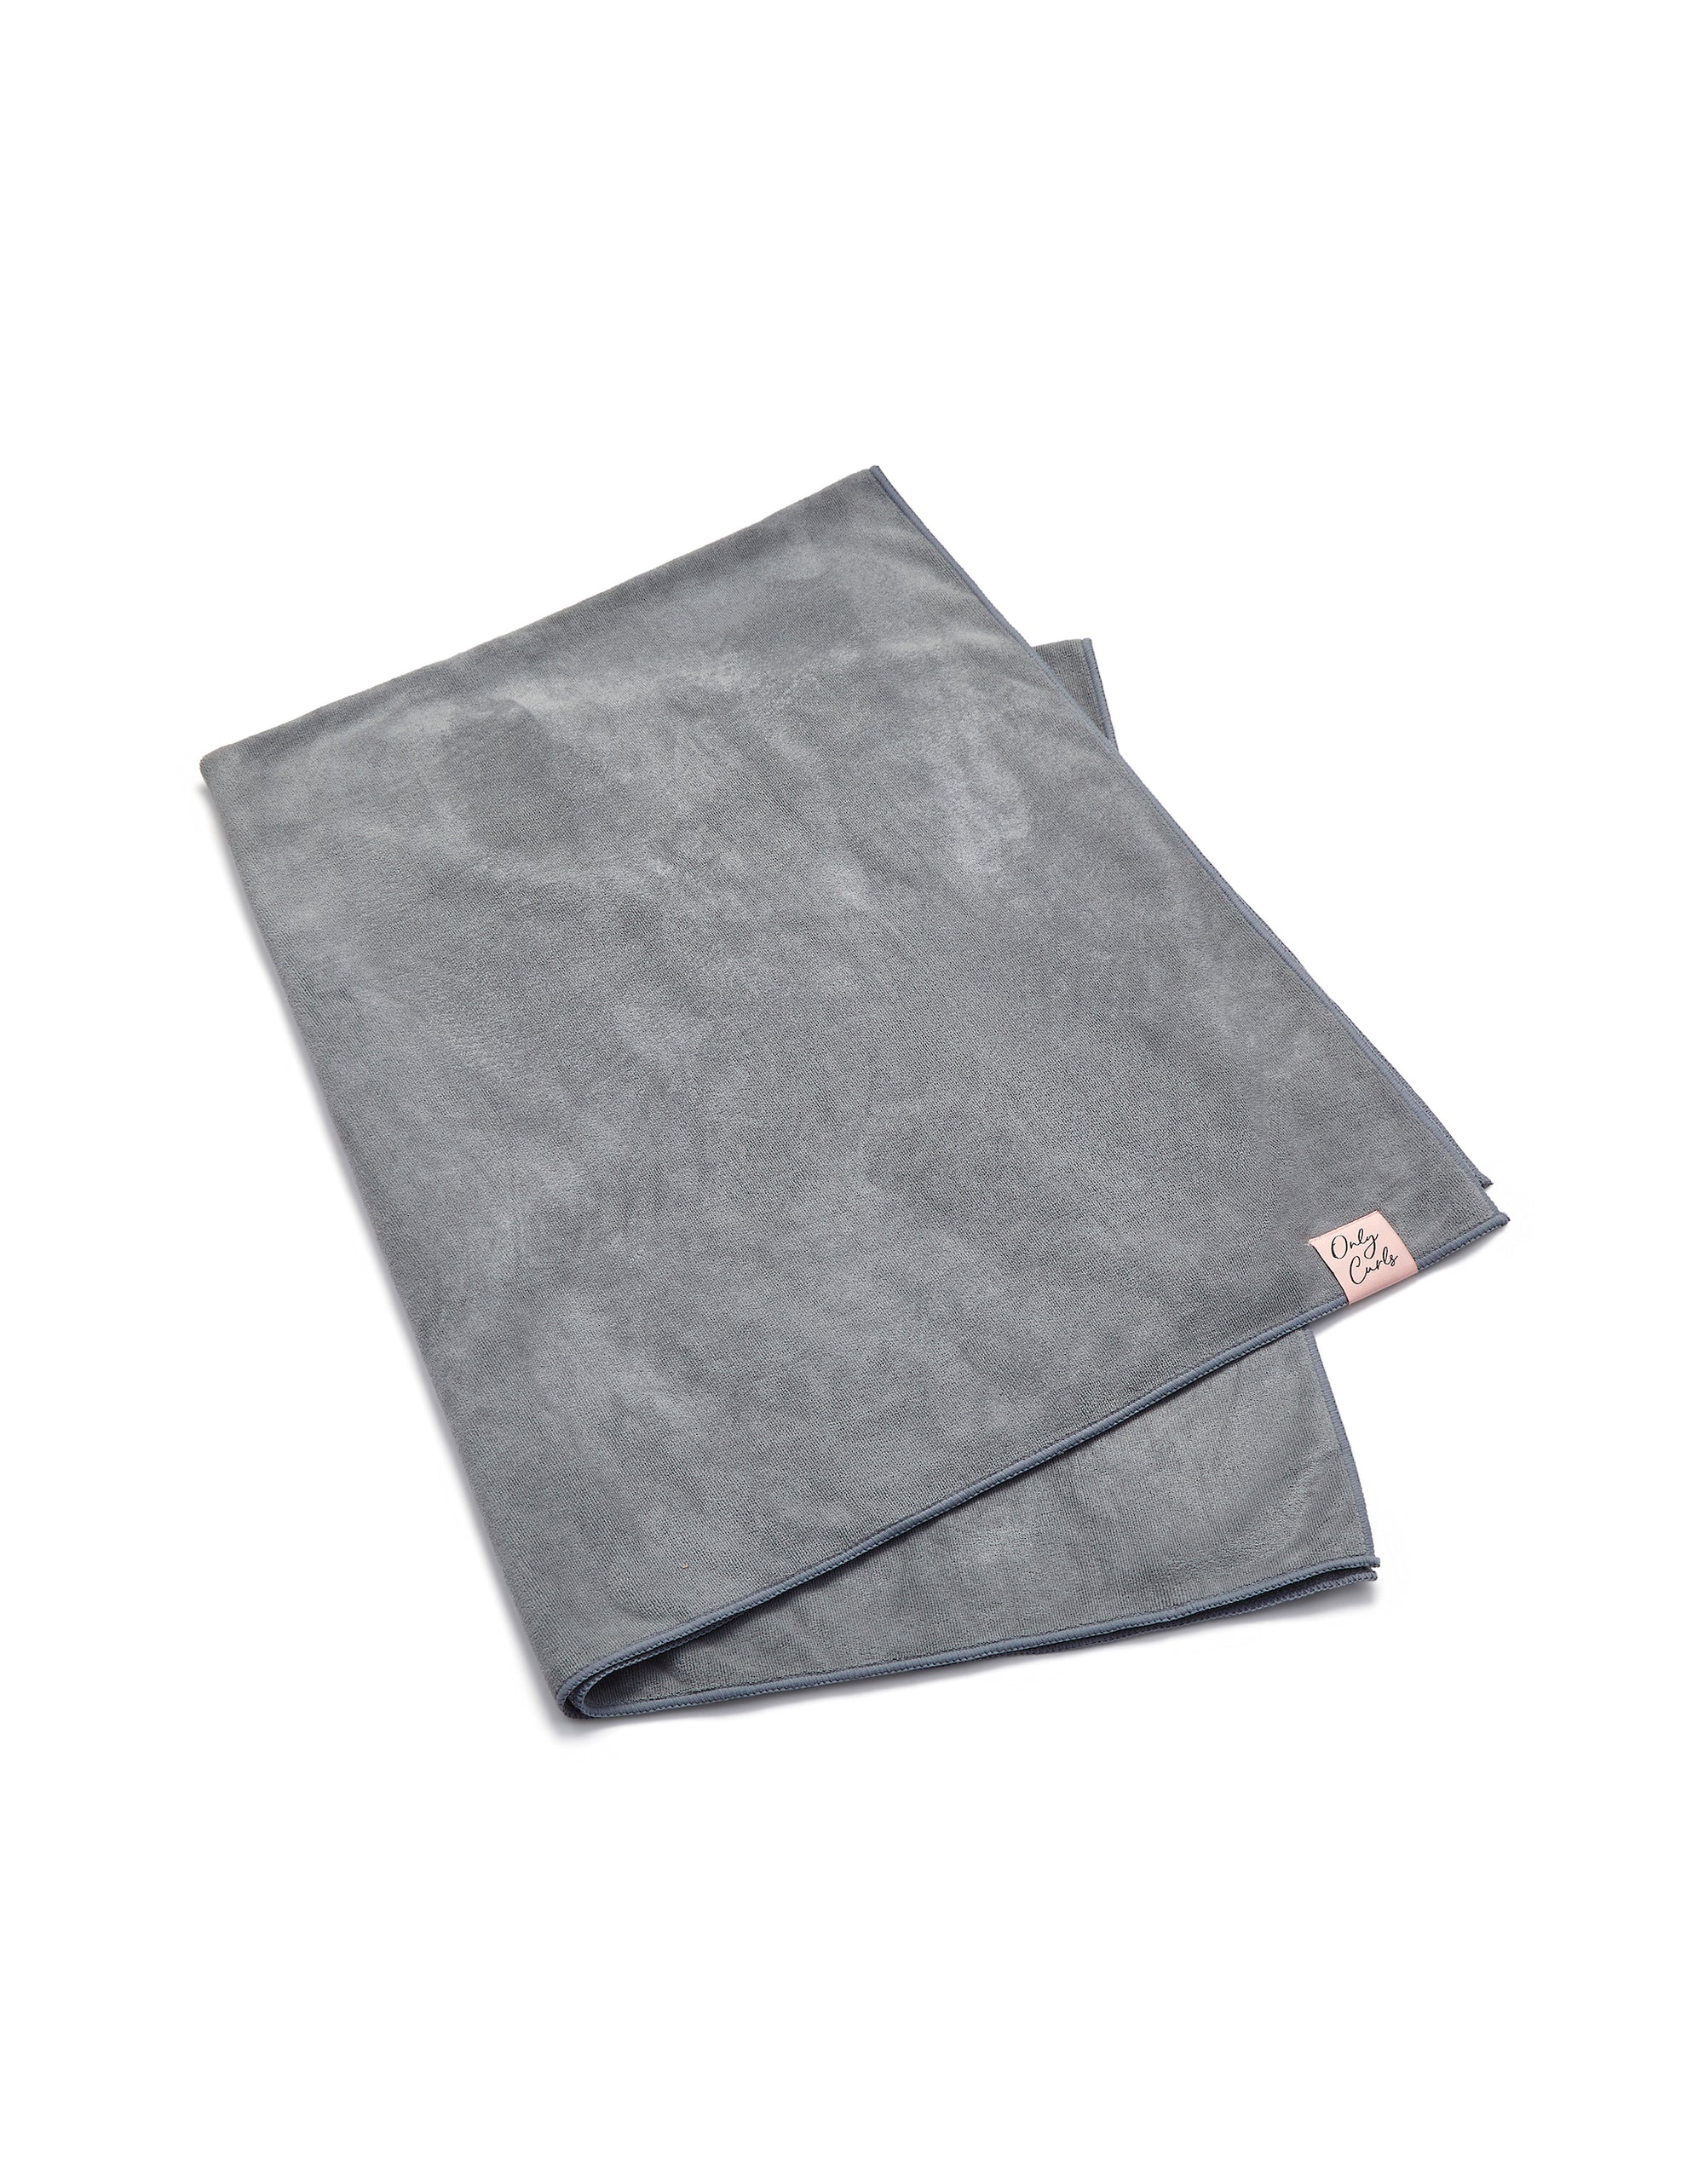 Only Curls Microfibre Hair XL Towel - Grey - Only Curls